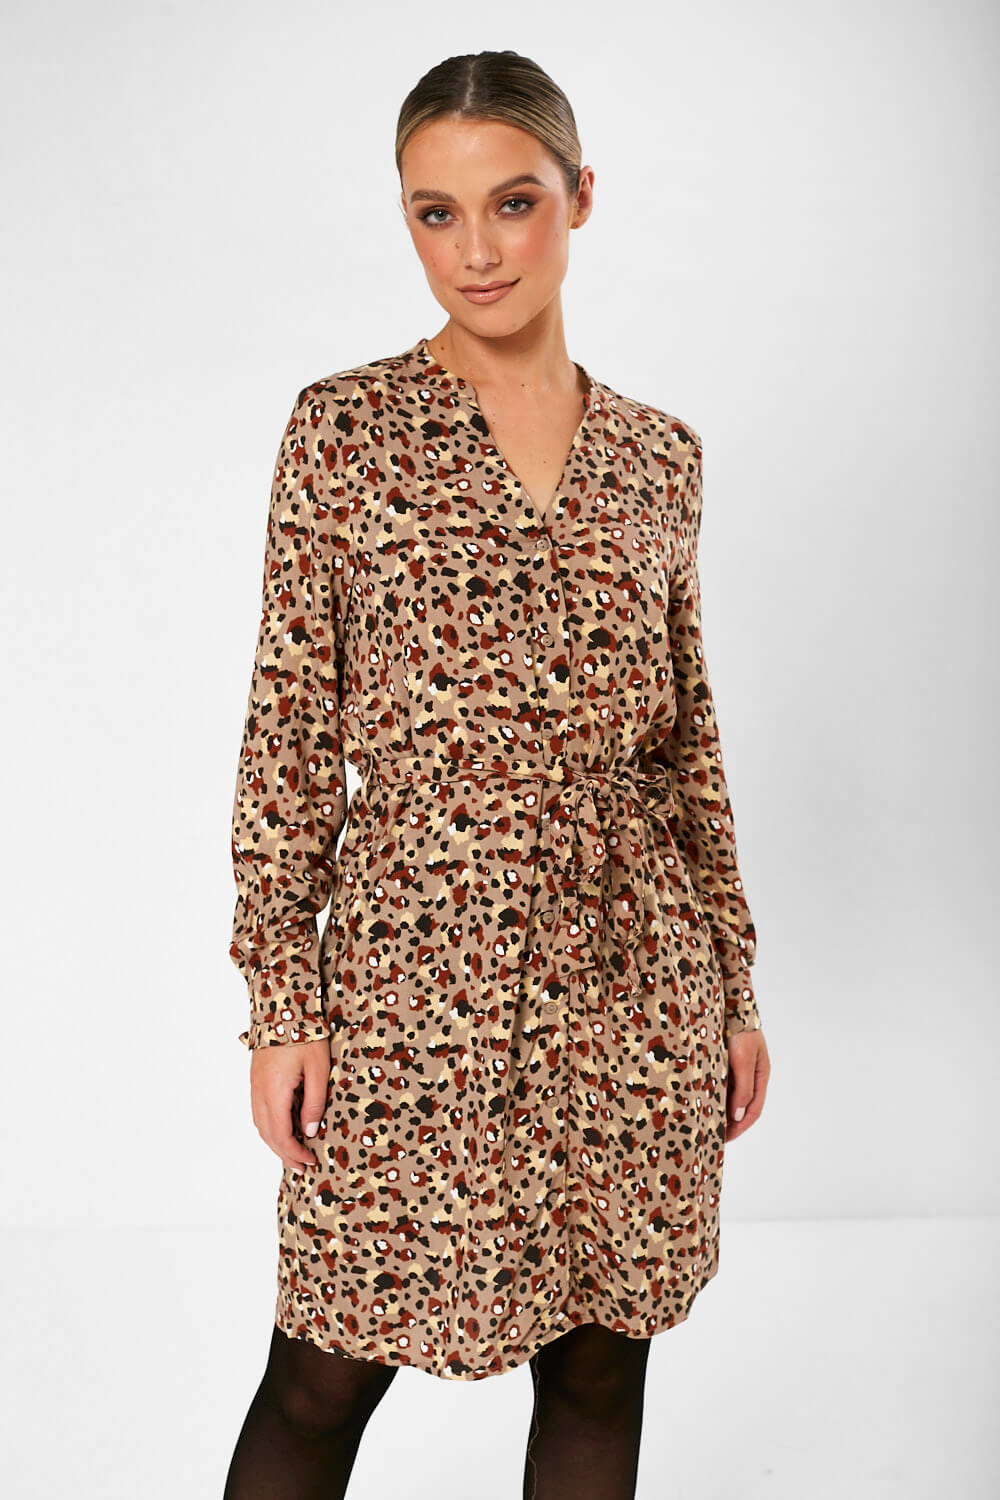 Pieces Carly Shirt Dress in Leopard Print